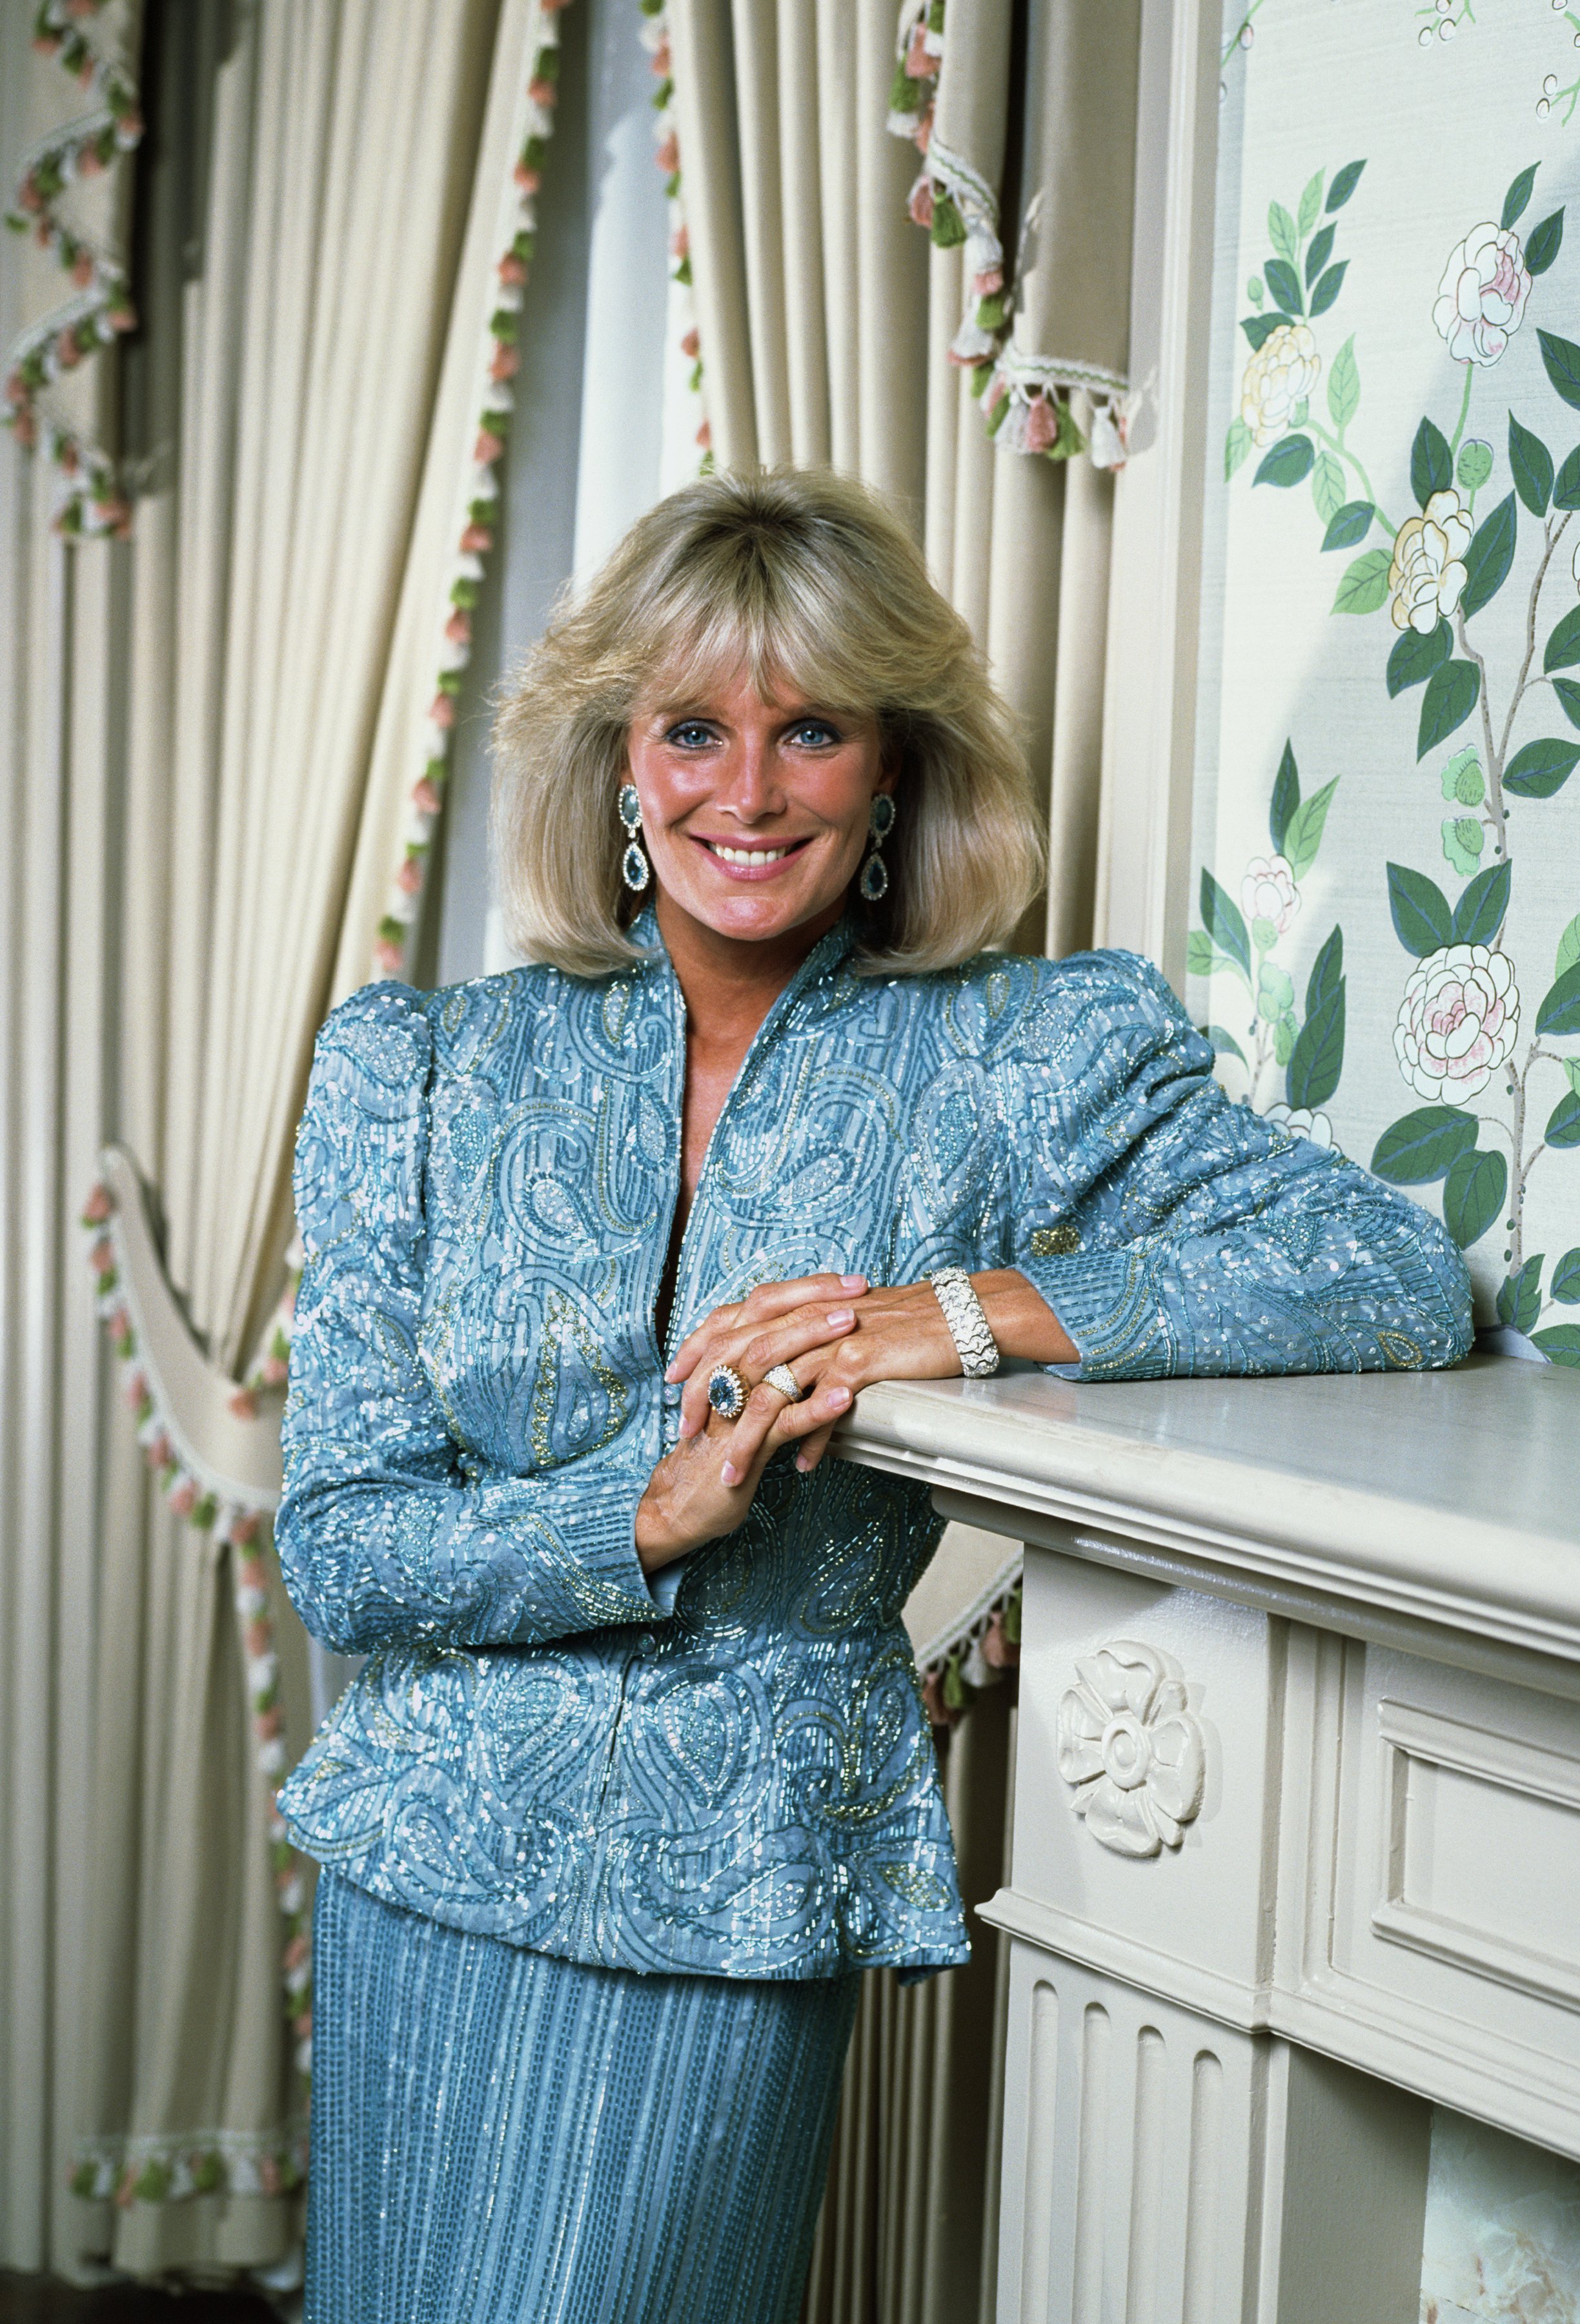 Linda Evans poses during a photo session in Hollywood, California in 1987 | Photo: Getty Images